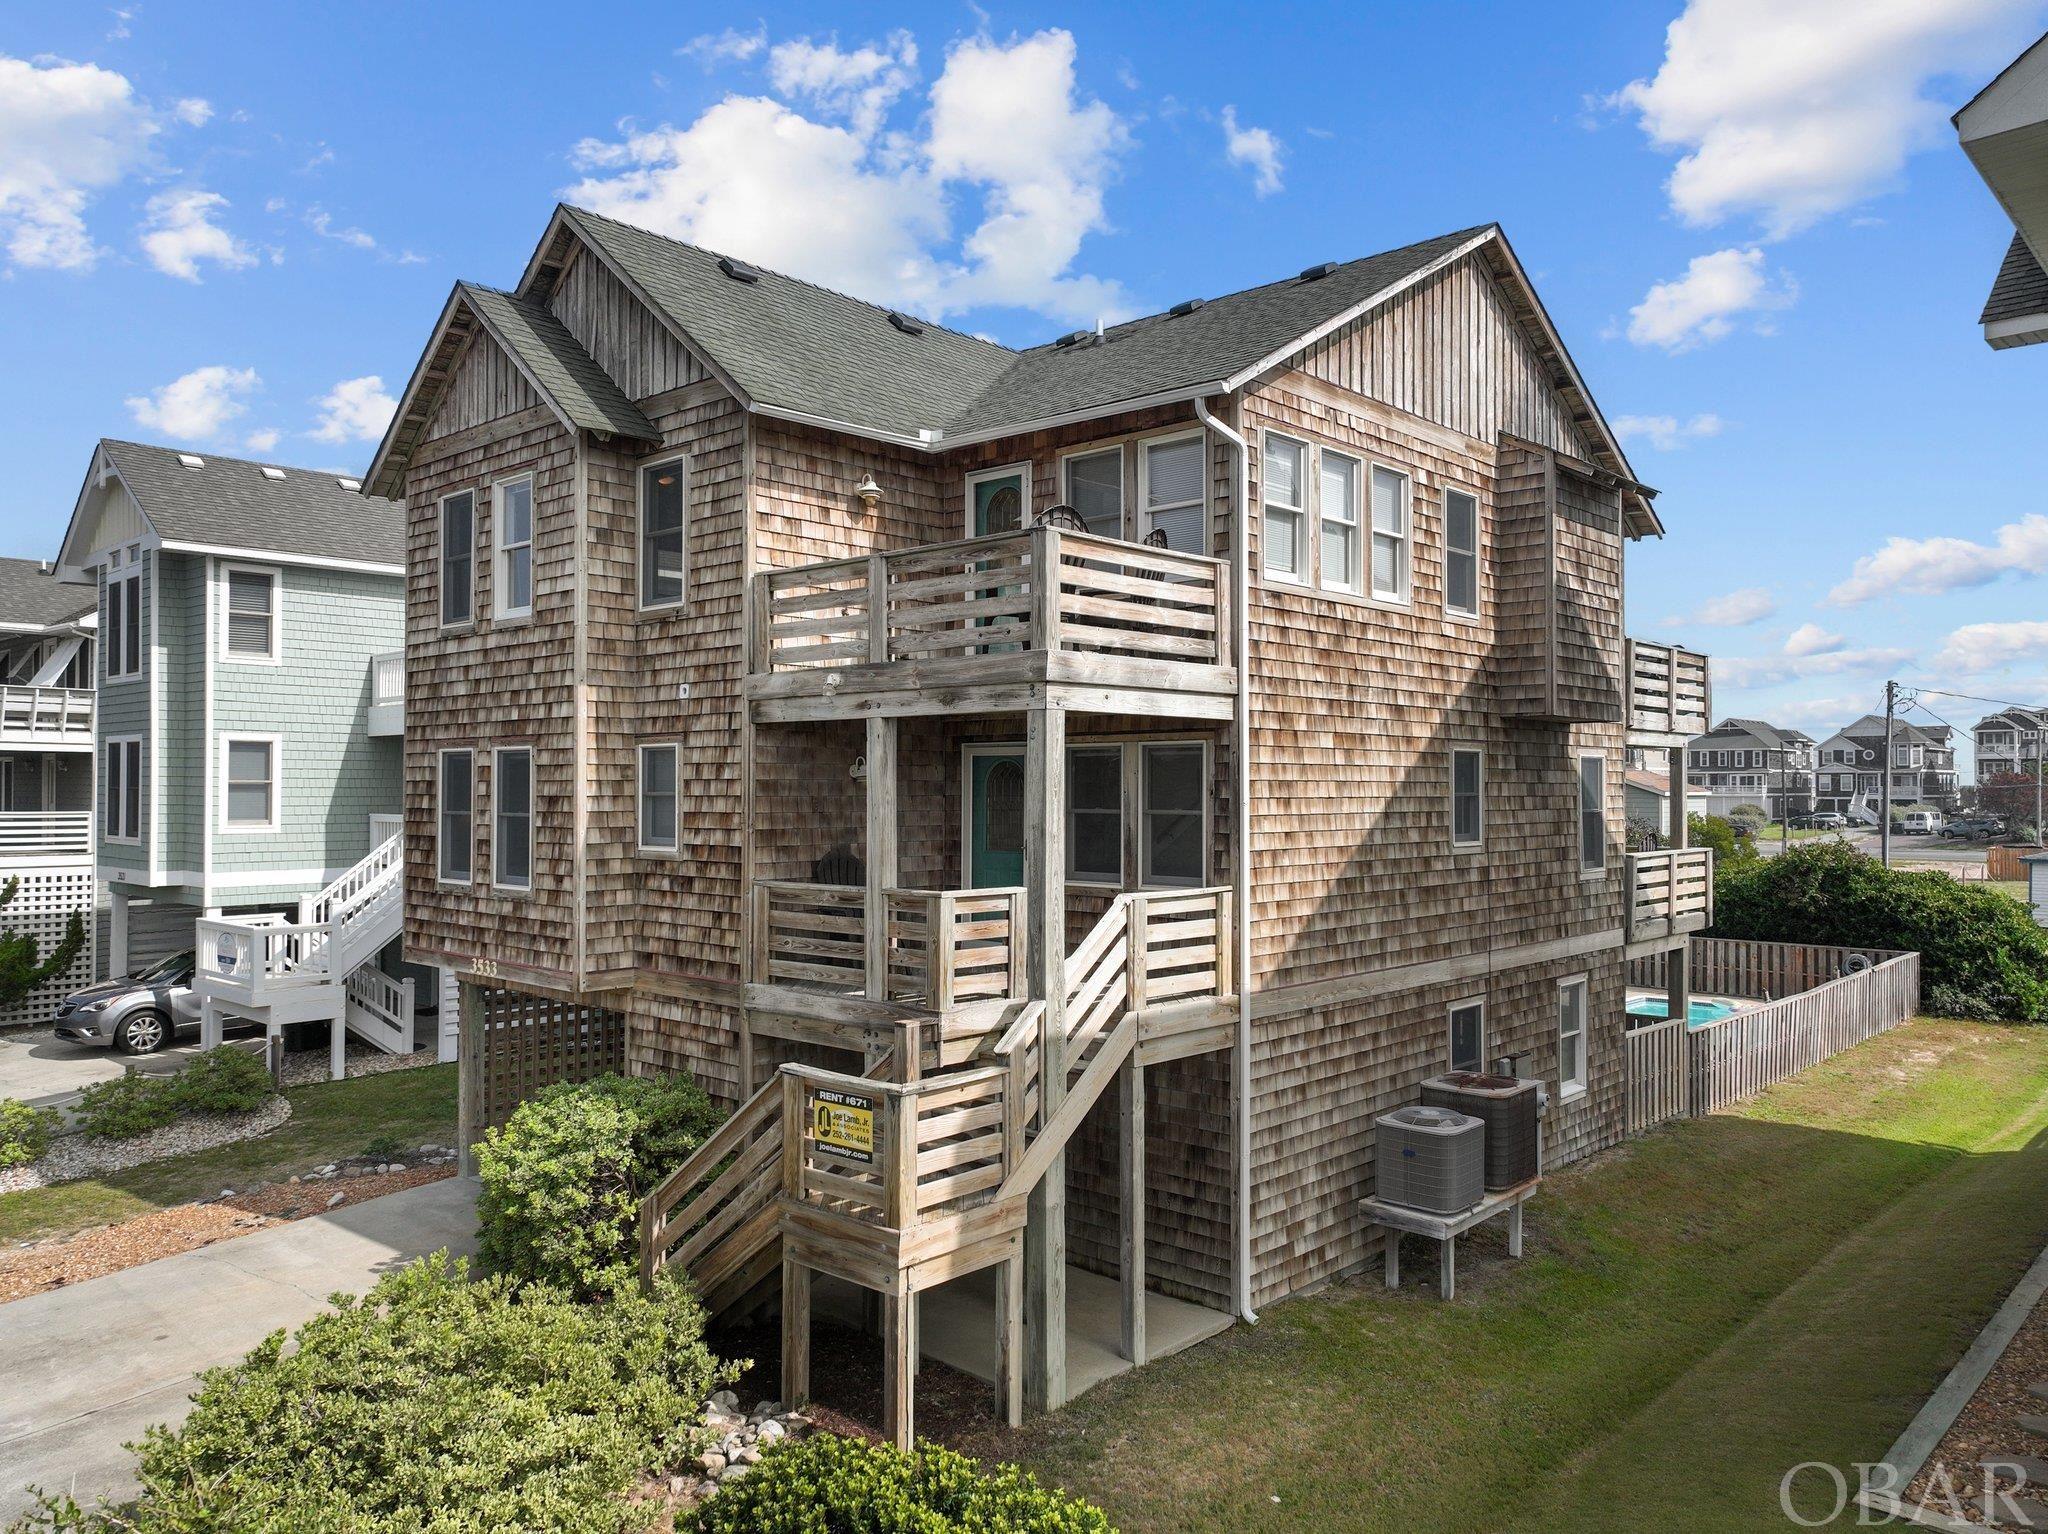 Located in an X Flood Zone, across the street from the entrance to Jockey's Ridge, close to restaurants, shopping and Nags Head Fishing Pier with easy beach access.  Old Nags Head Place provides all the charm of the historic Nags Head architecture while providing the desired amenities of today including a reverse floor plan to showcase the ocean views with an open concept living area, multiple en suite bedrooms, game room, pool and hot tub.